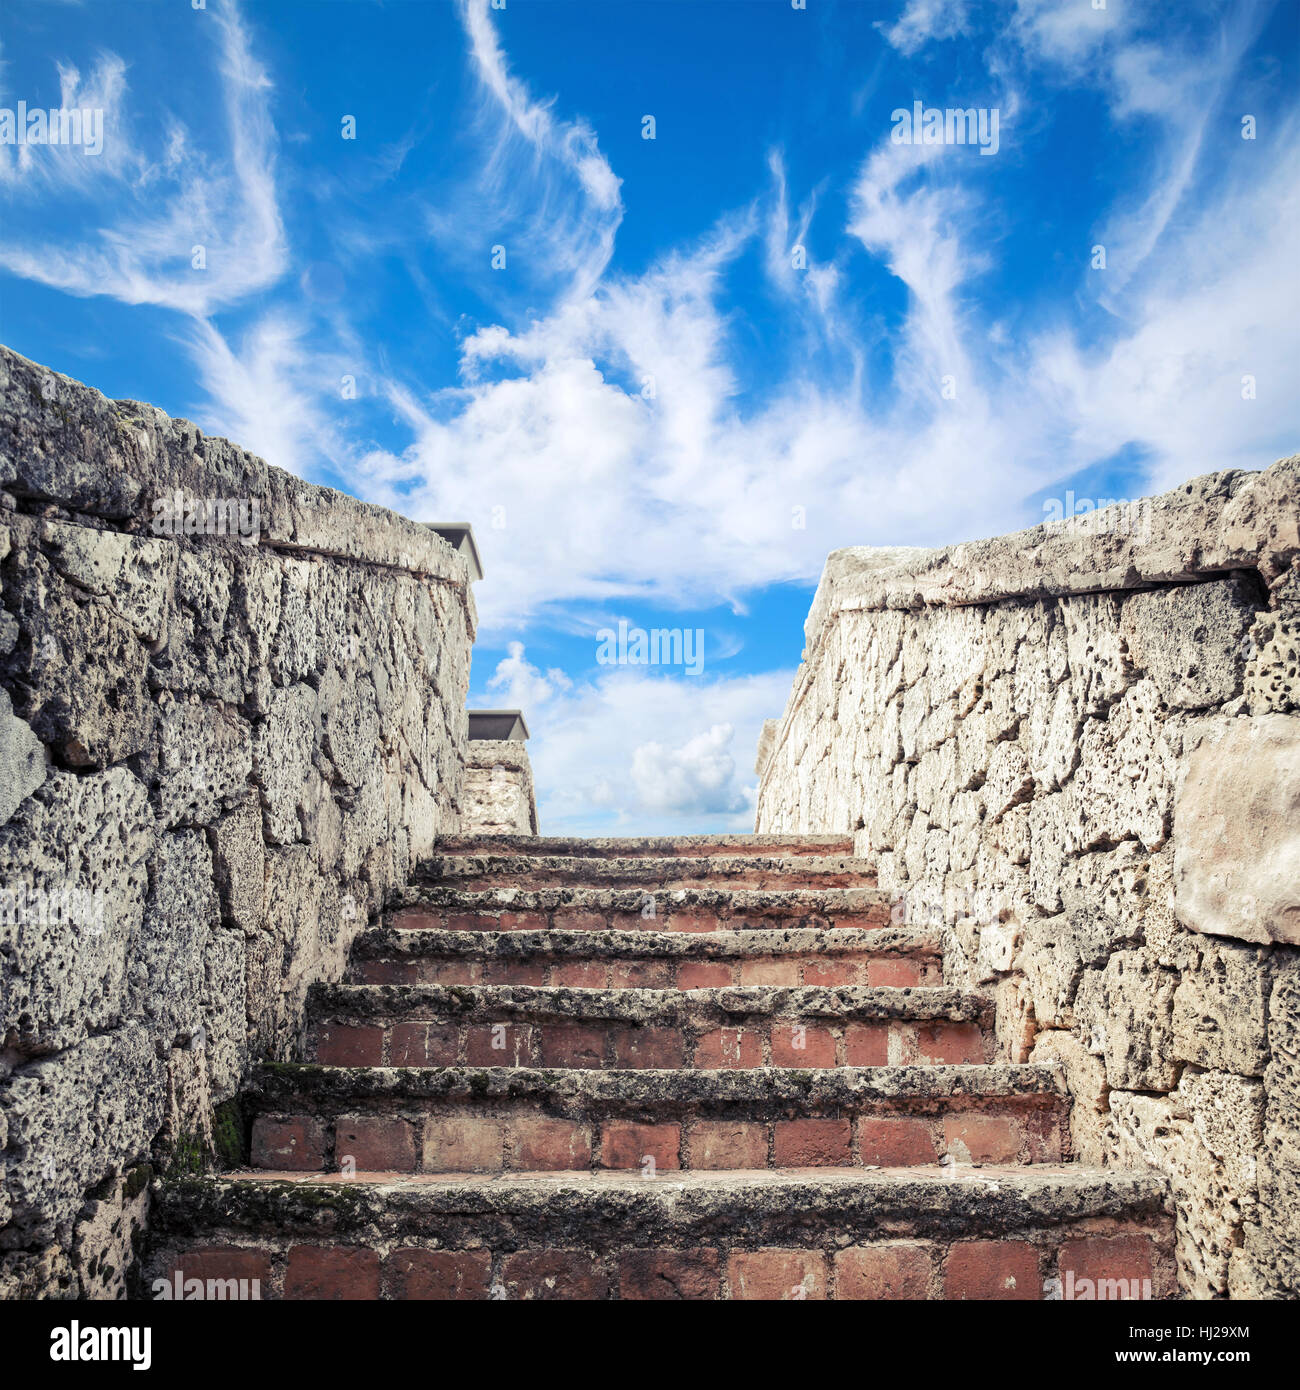 Ancient stone stairway goes up under blue cloudy sky background Stock Photo